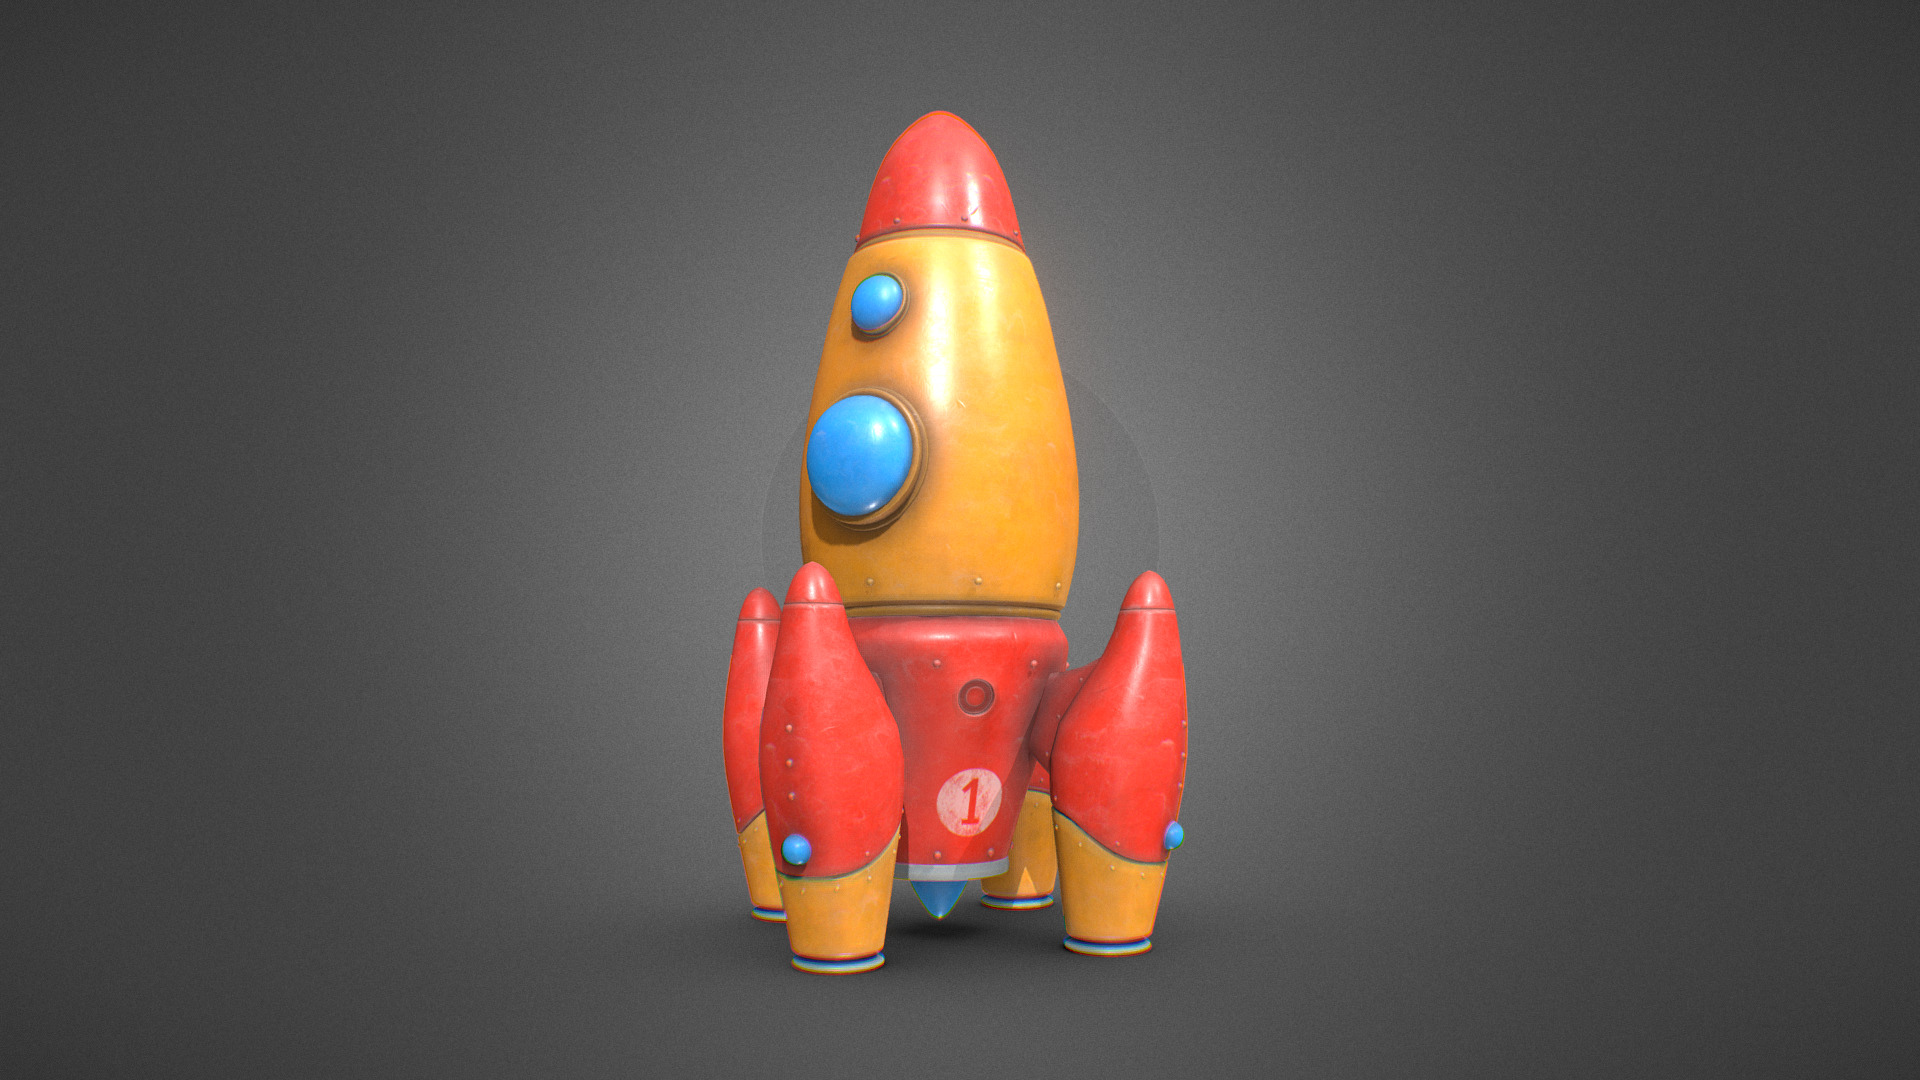 3D model Vintage rocket toy - This is a 3D model of the Vintage rocket toy. The 3D model is about a group of orange and yellow toy figures.